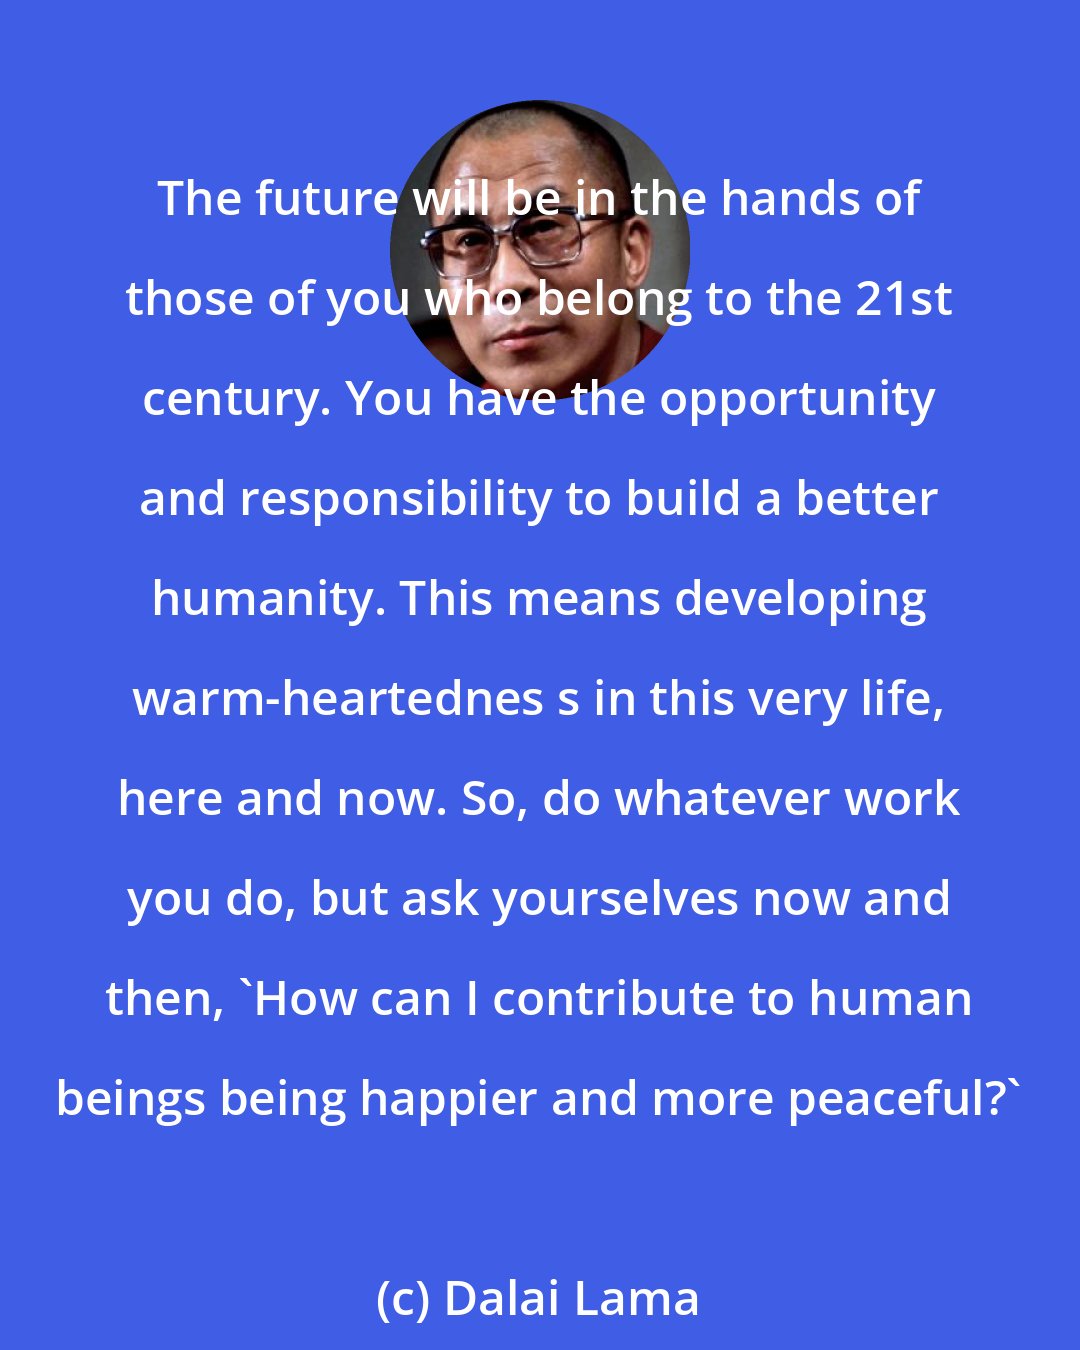 Dalai Lama: The future will be in the hands of those of you who belong to the 21st century. You have the opportunity and responsibility to build a better humanity. This means developing warm-heartednes s in this very life, here and now. So, do whatever work you do, but ask yourselves now and then, 'How can I contribute to human beings being happier and more peaceful?'